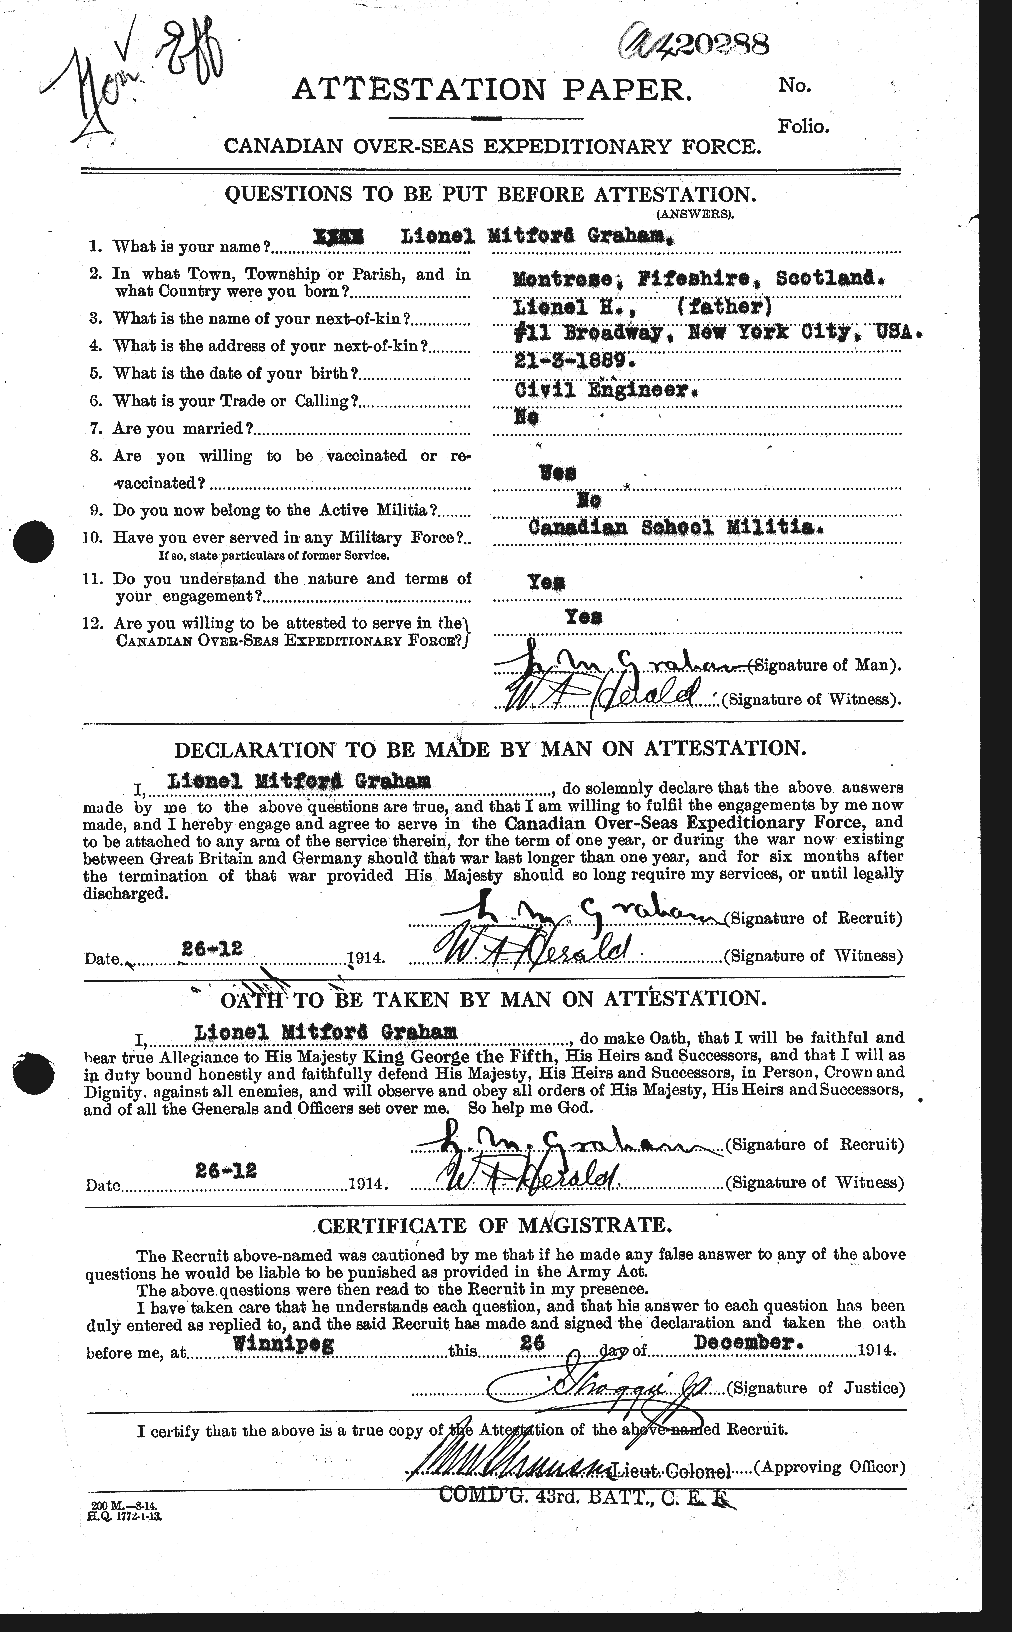 Personnel Records of the First World War - CEF 359275a